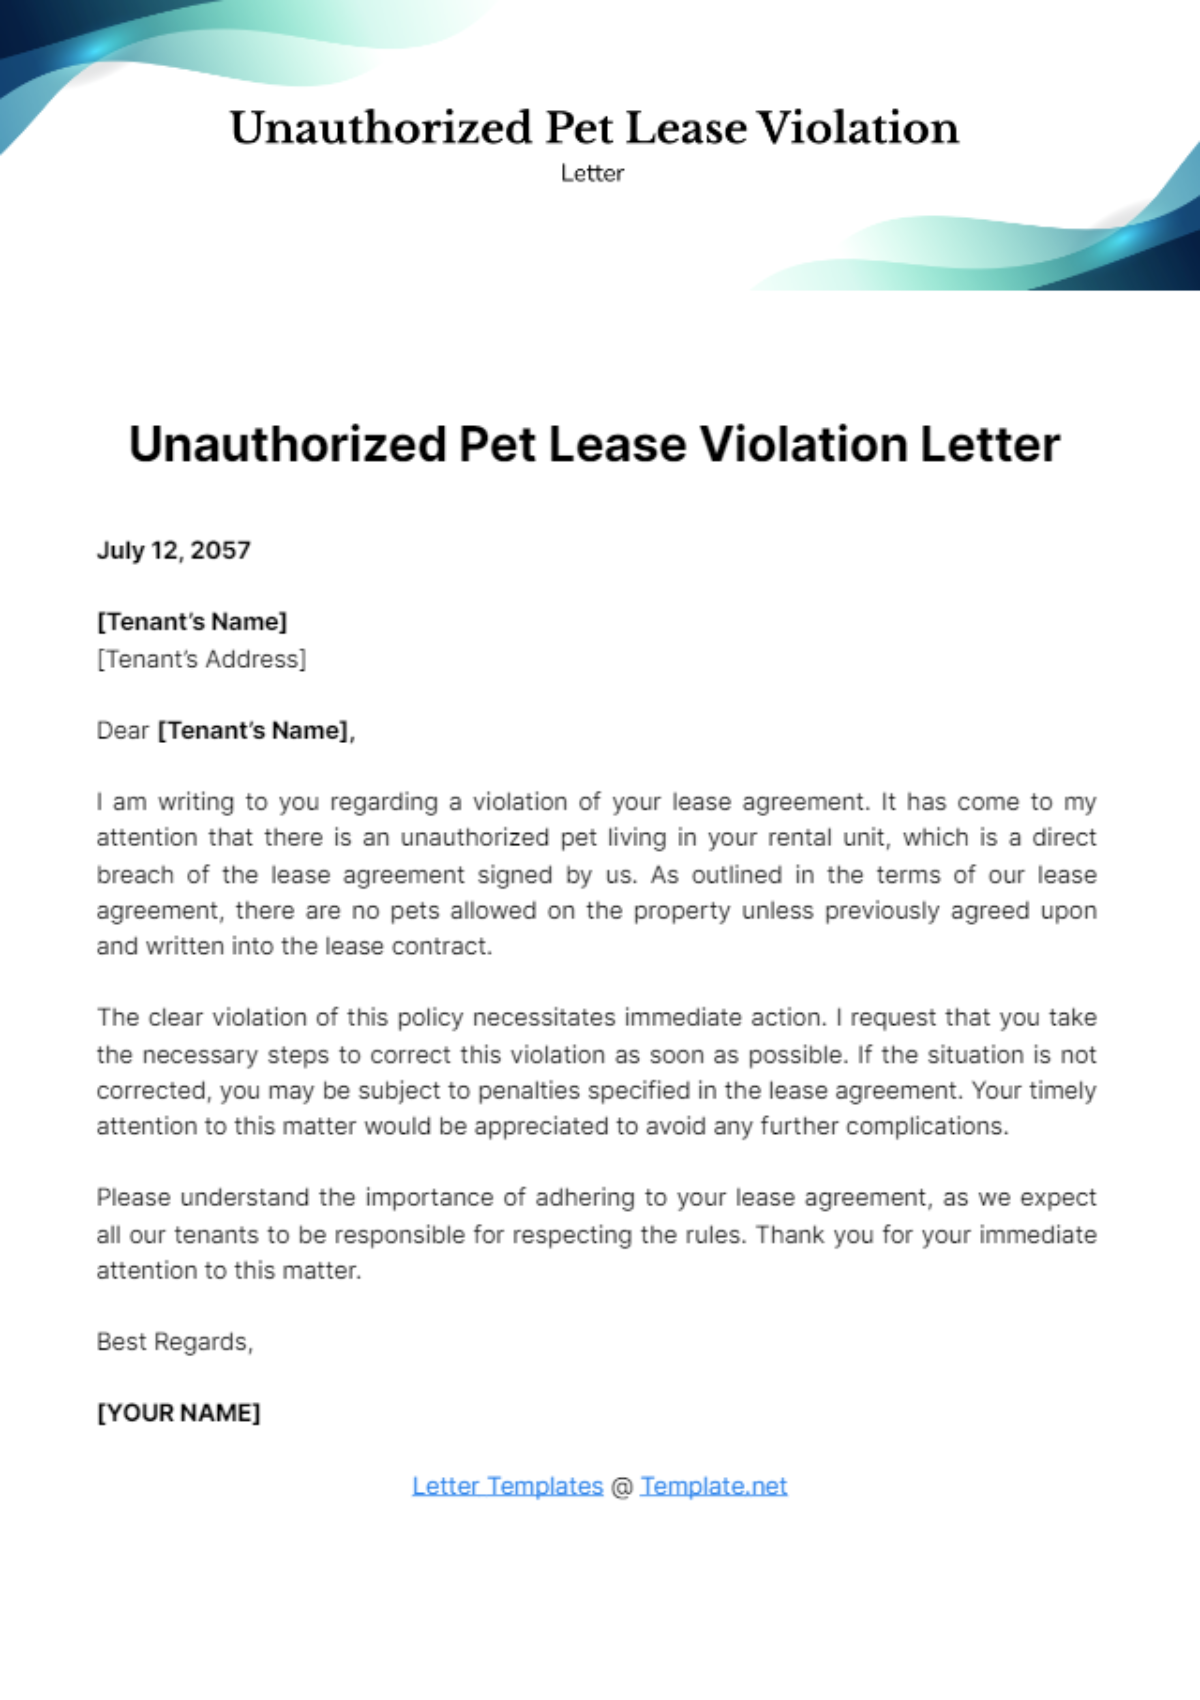 Free Unauthorized Pet Lease Violation Letter Template